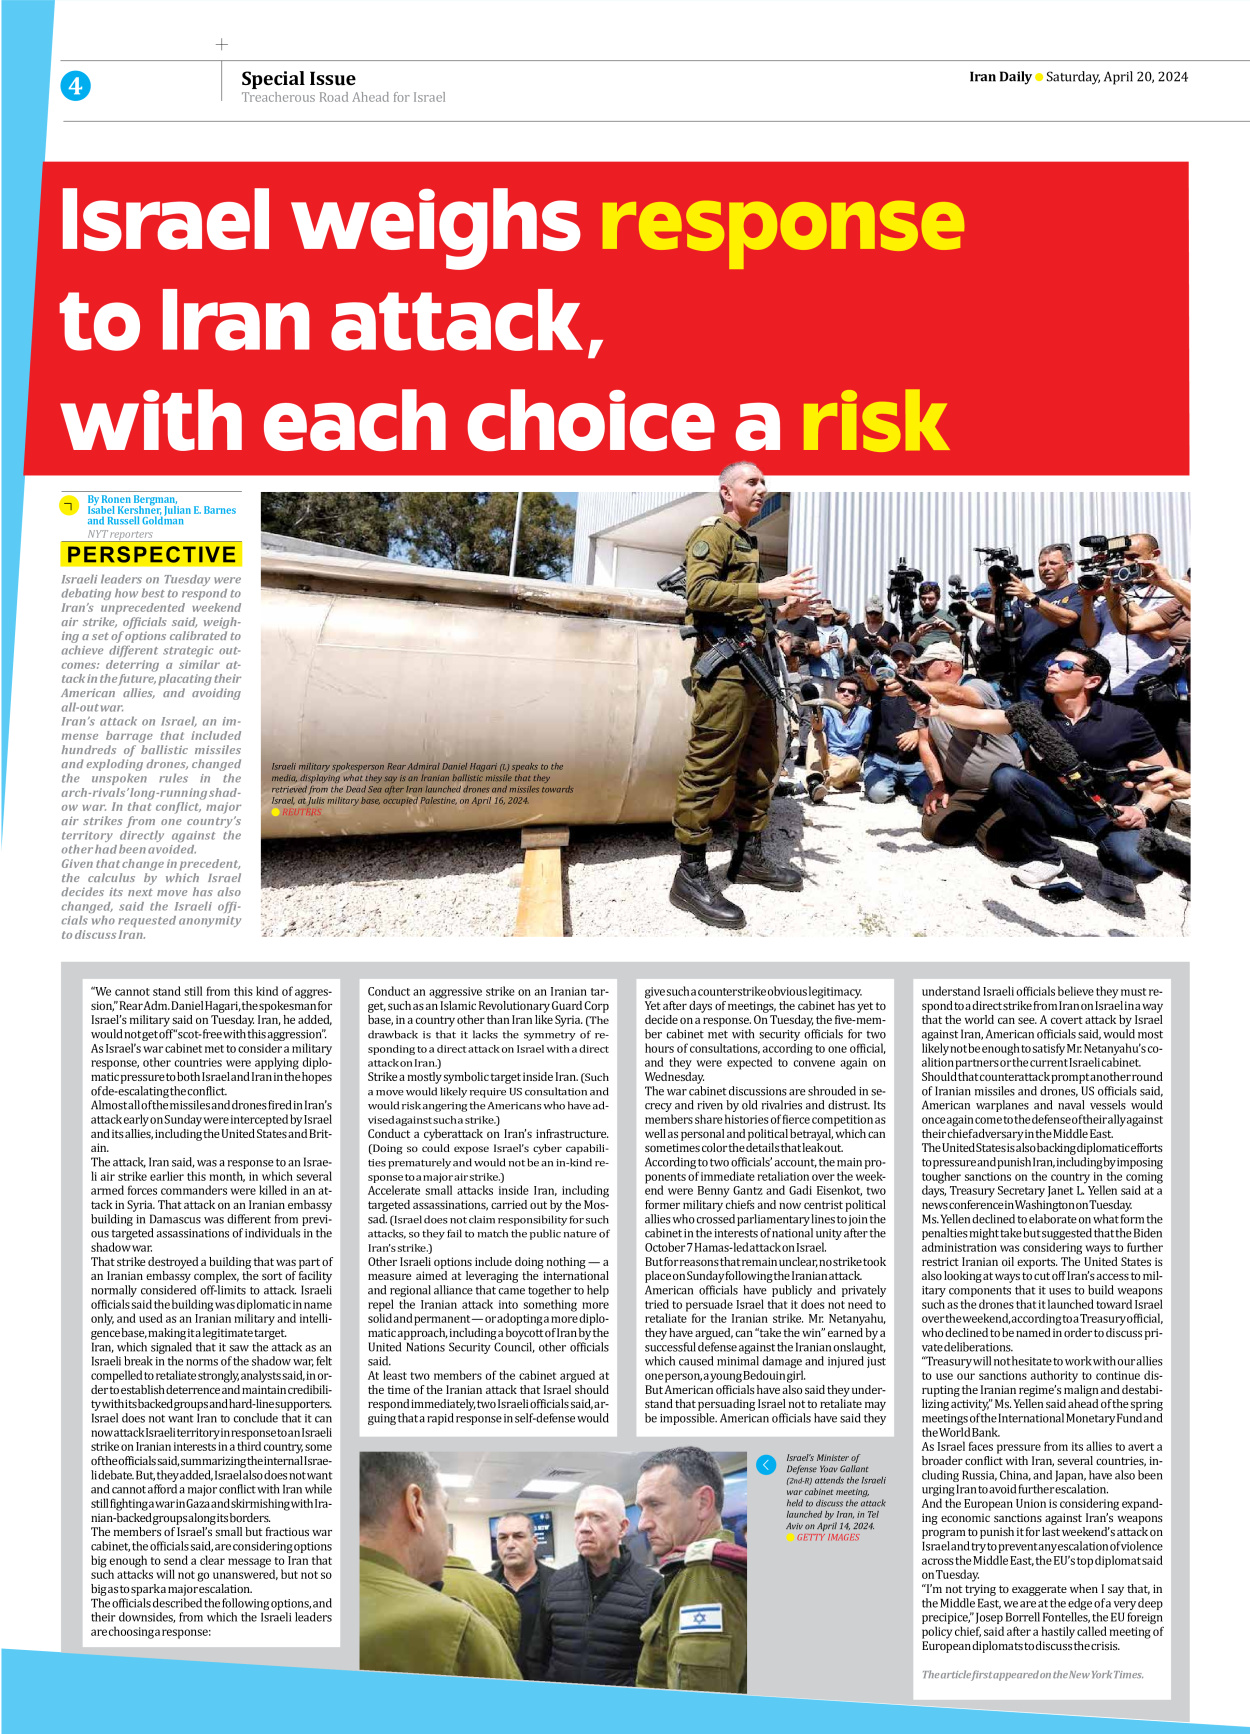 Iran Daily - Number Seven Thousand Five Hundred and Thirty Seven - 20 April 2024 - Page 4